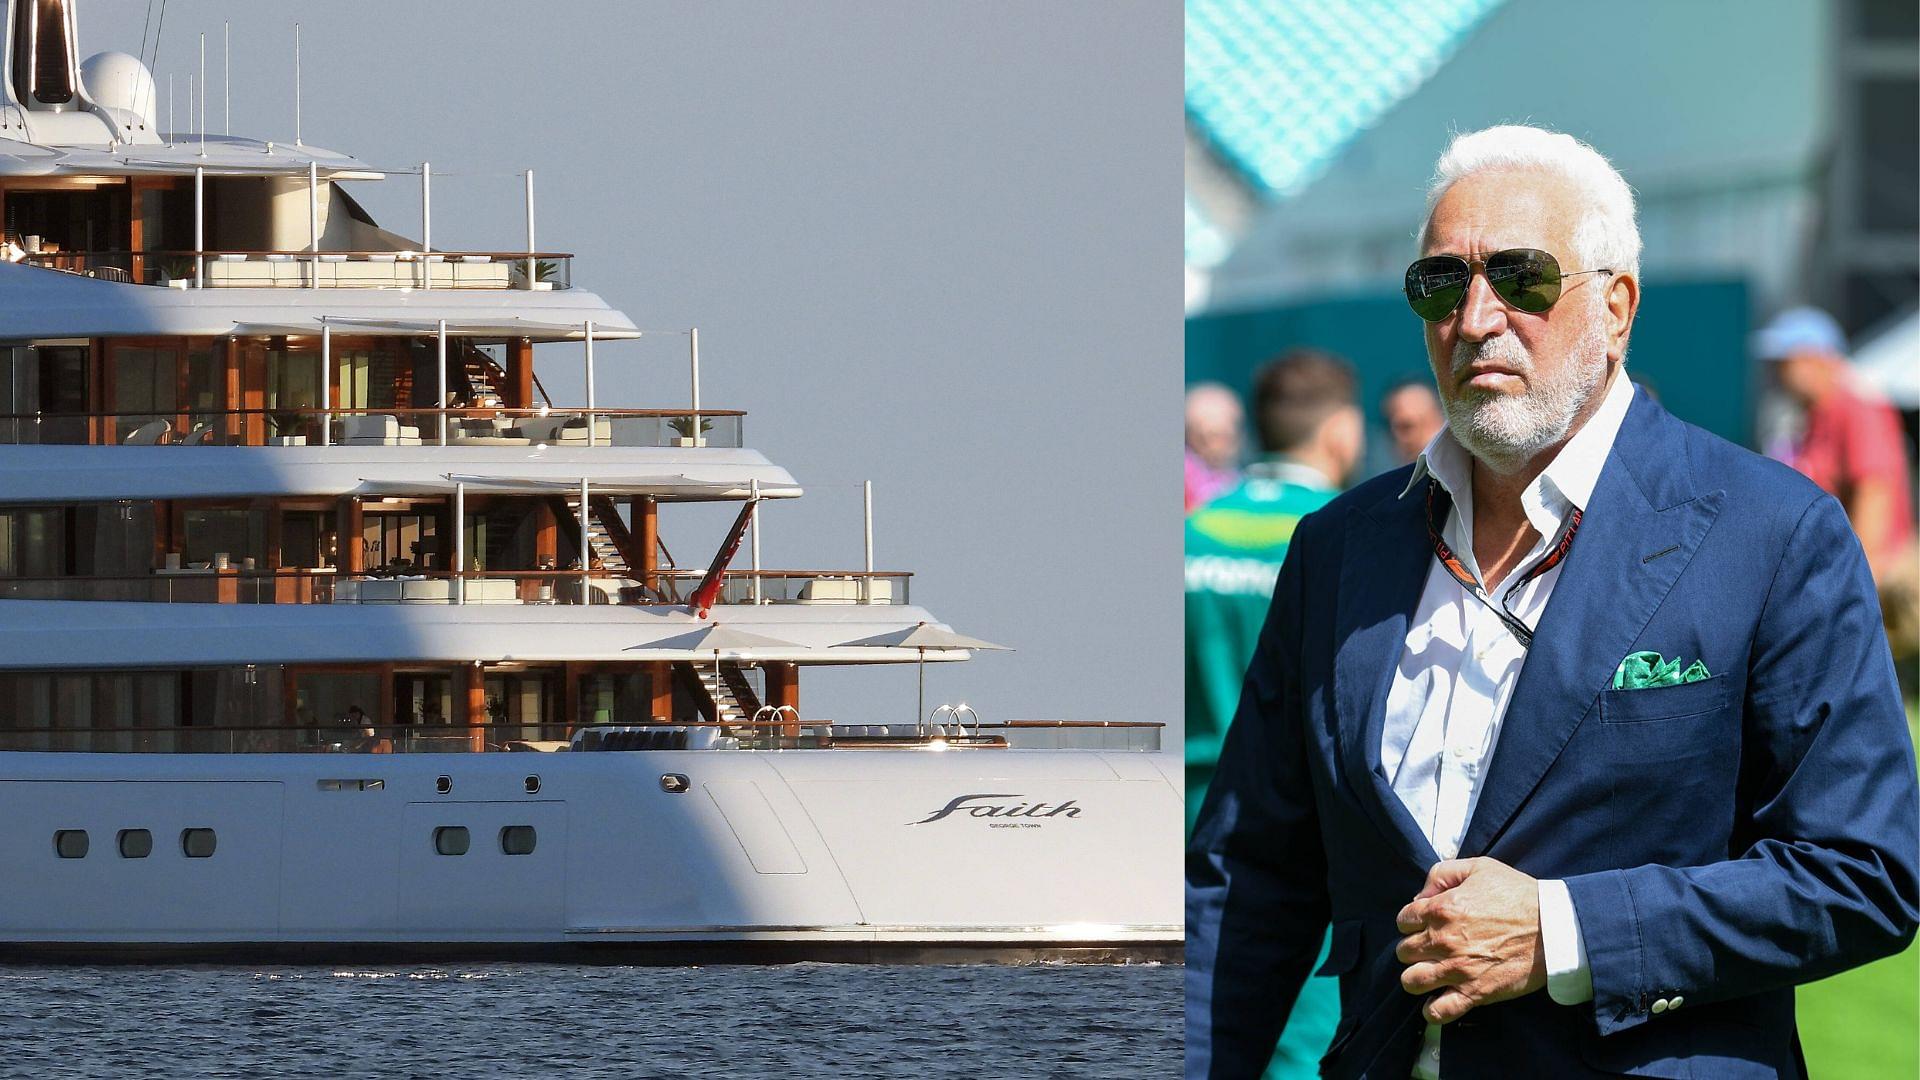 $200 Million Superyacht Owned by Nicholas Latifi’s Father Takes the Spotlight Boarding Lance and Lawrence Stroll